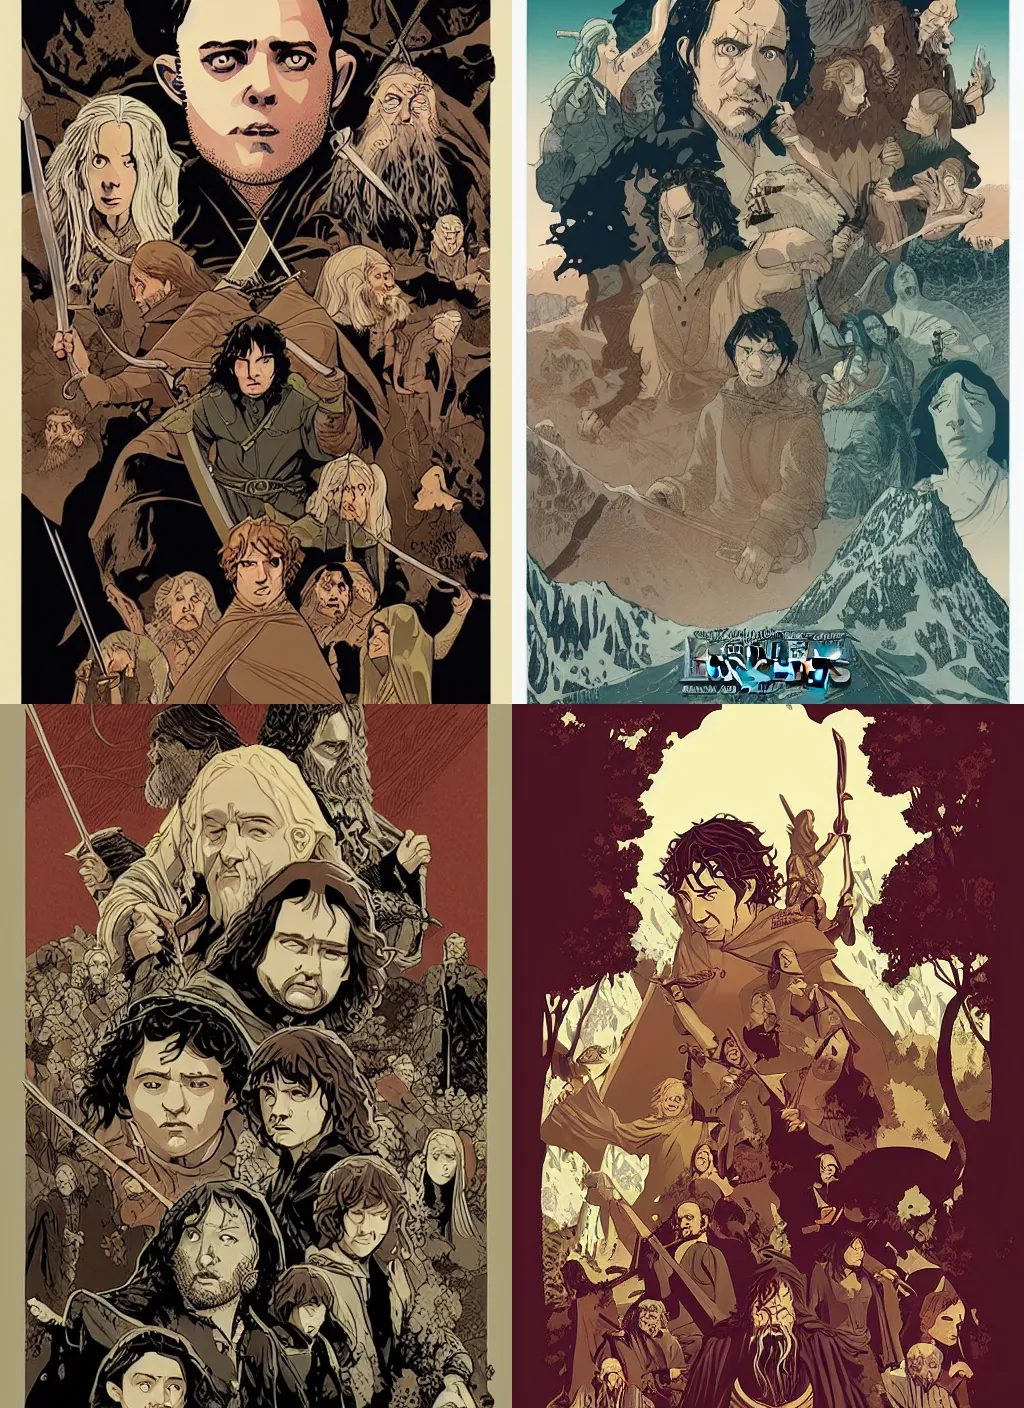 Prompt: Lord of the Rings movie poster artwork by Tomer Hanuka